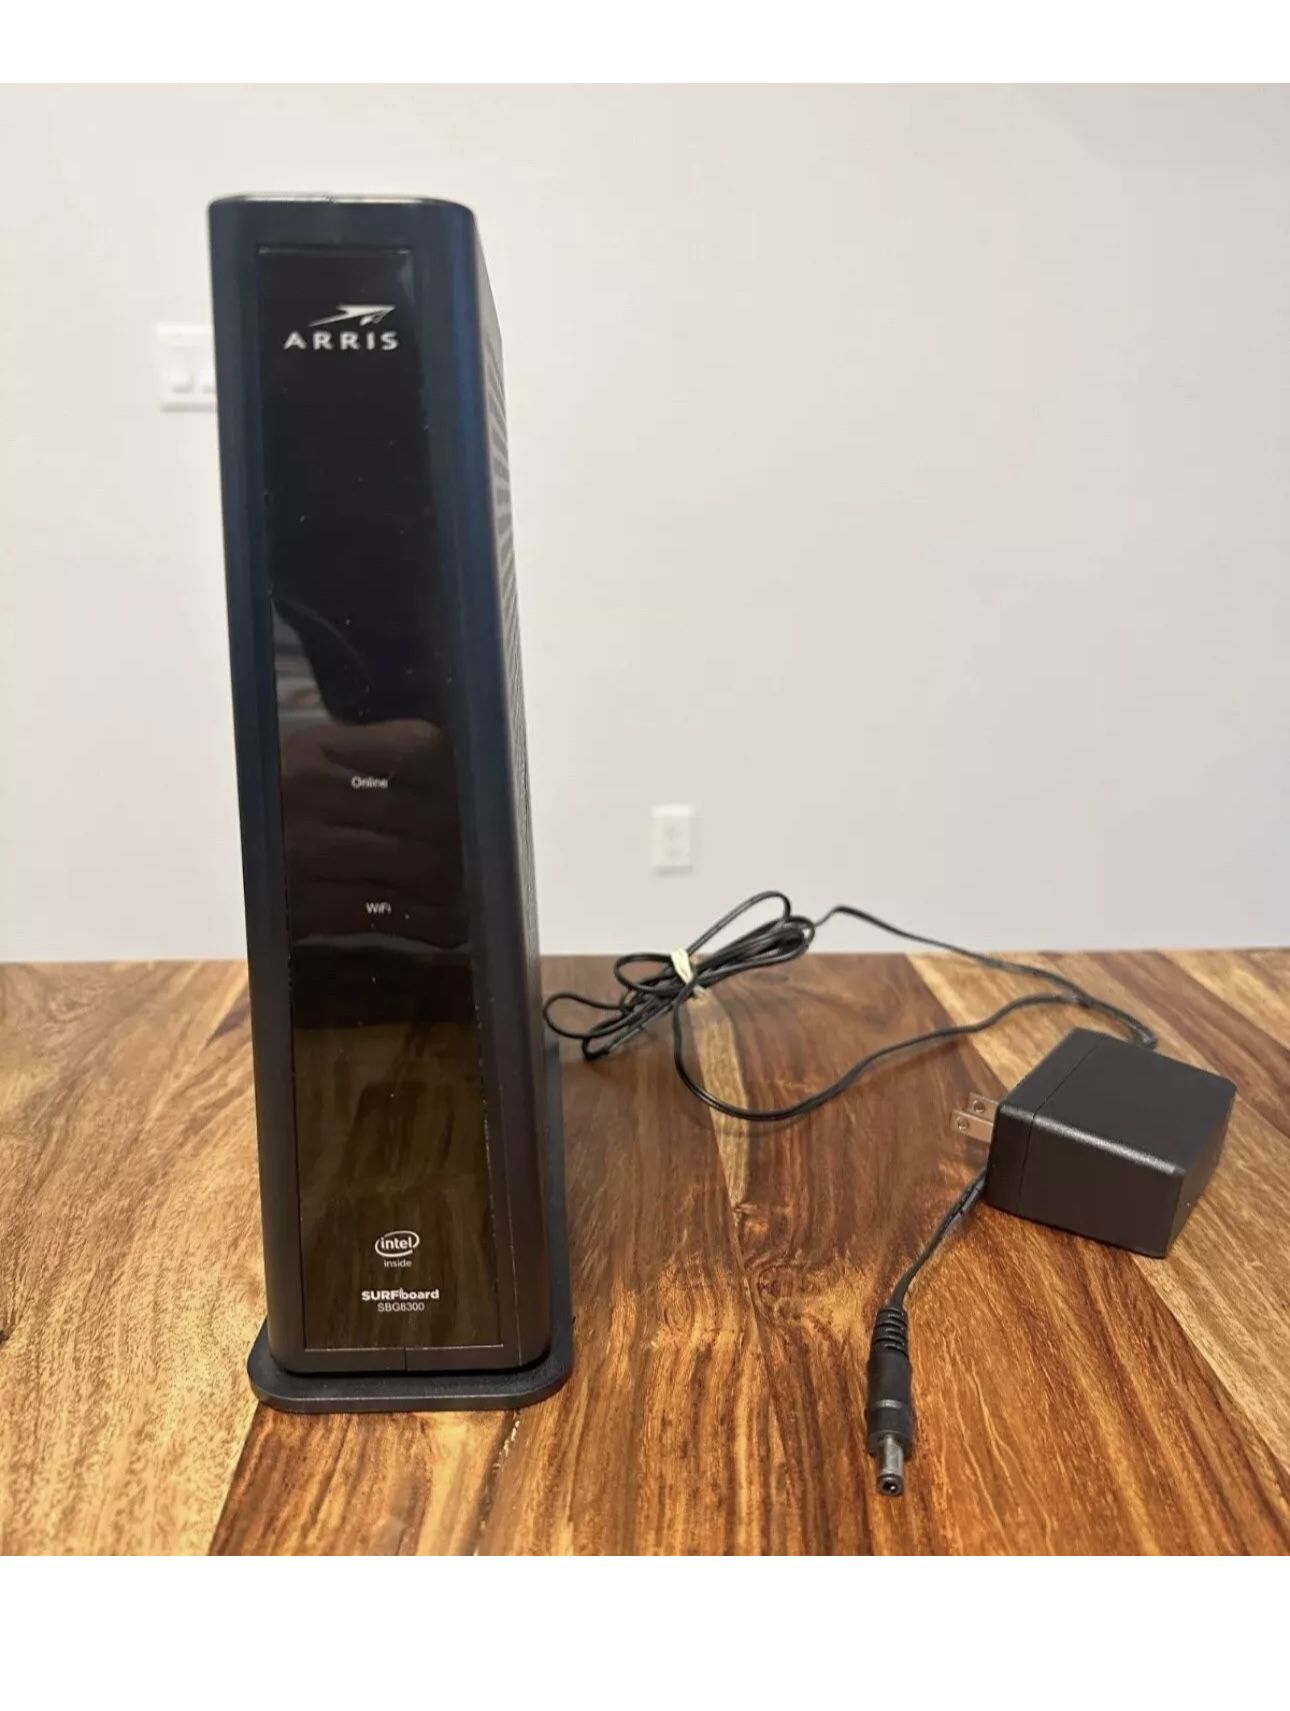 All In One Modem/Router Arris Surfboard SBG8300